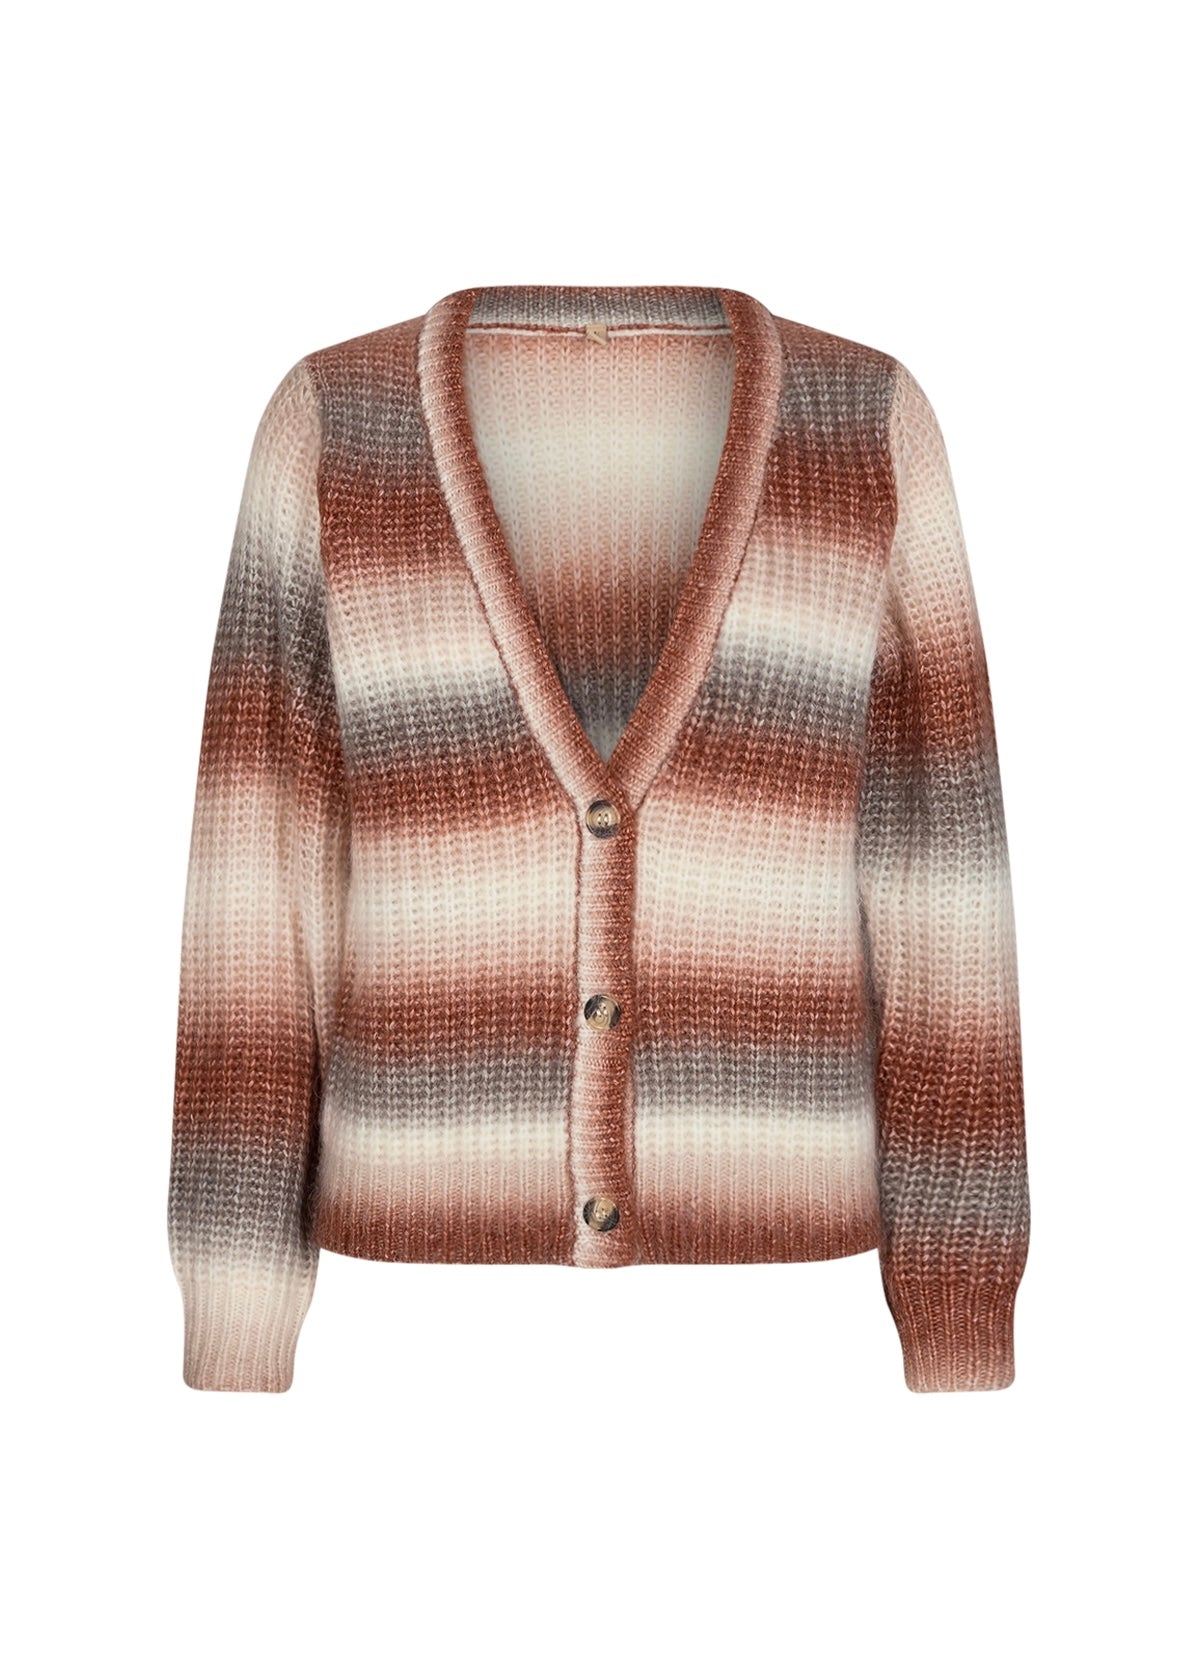 SoyaConcept - Aisa 2 Knitted Cardigan *LAST ONE*